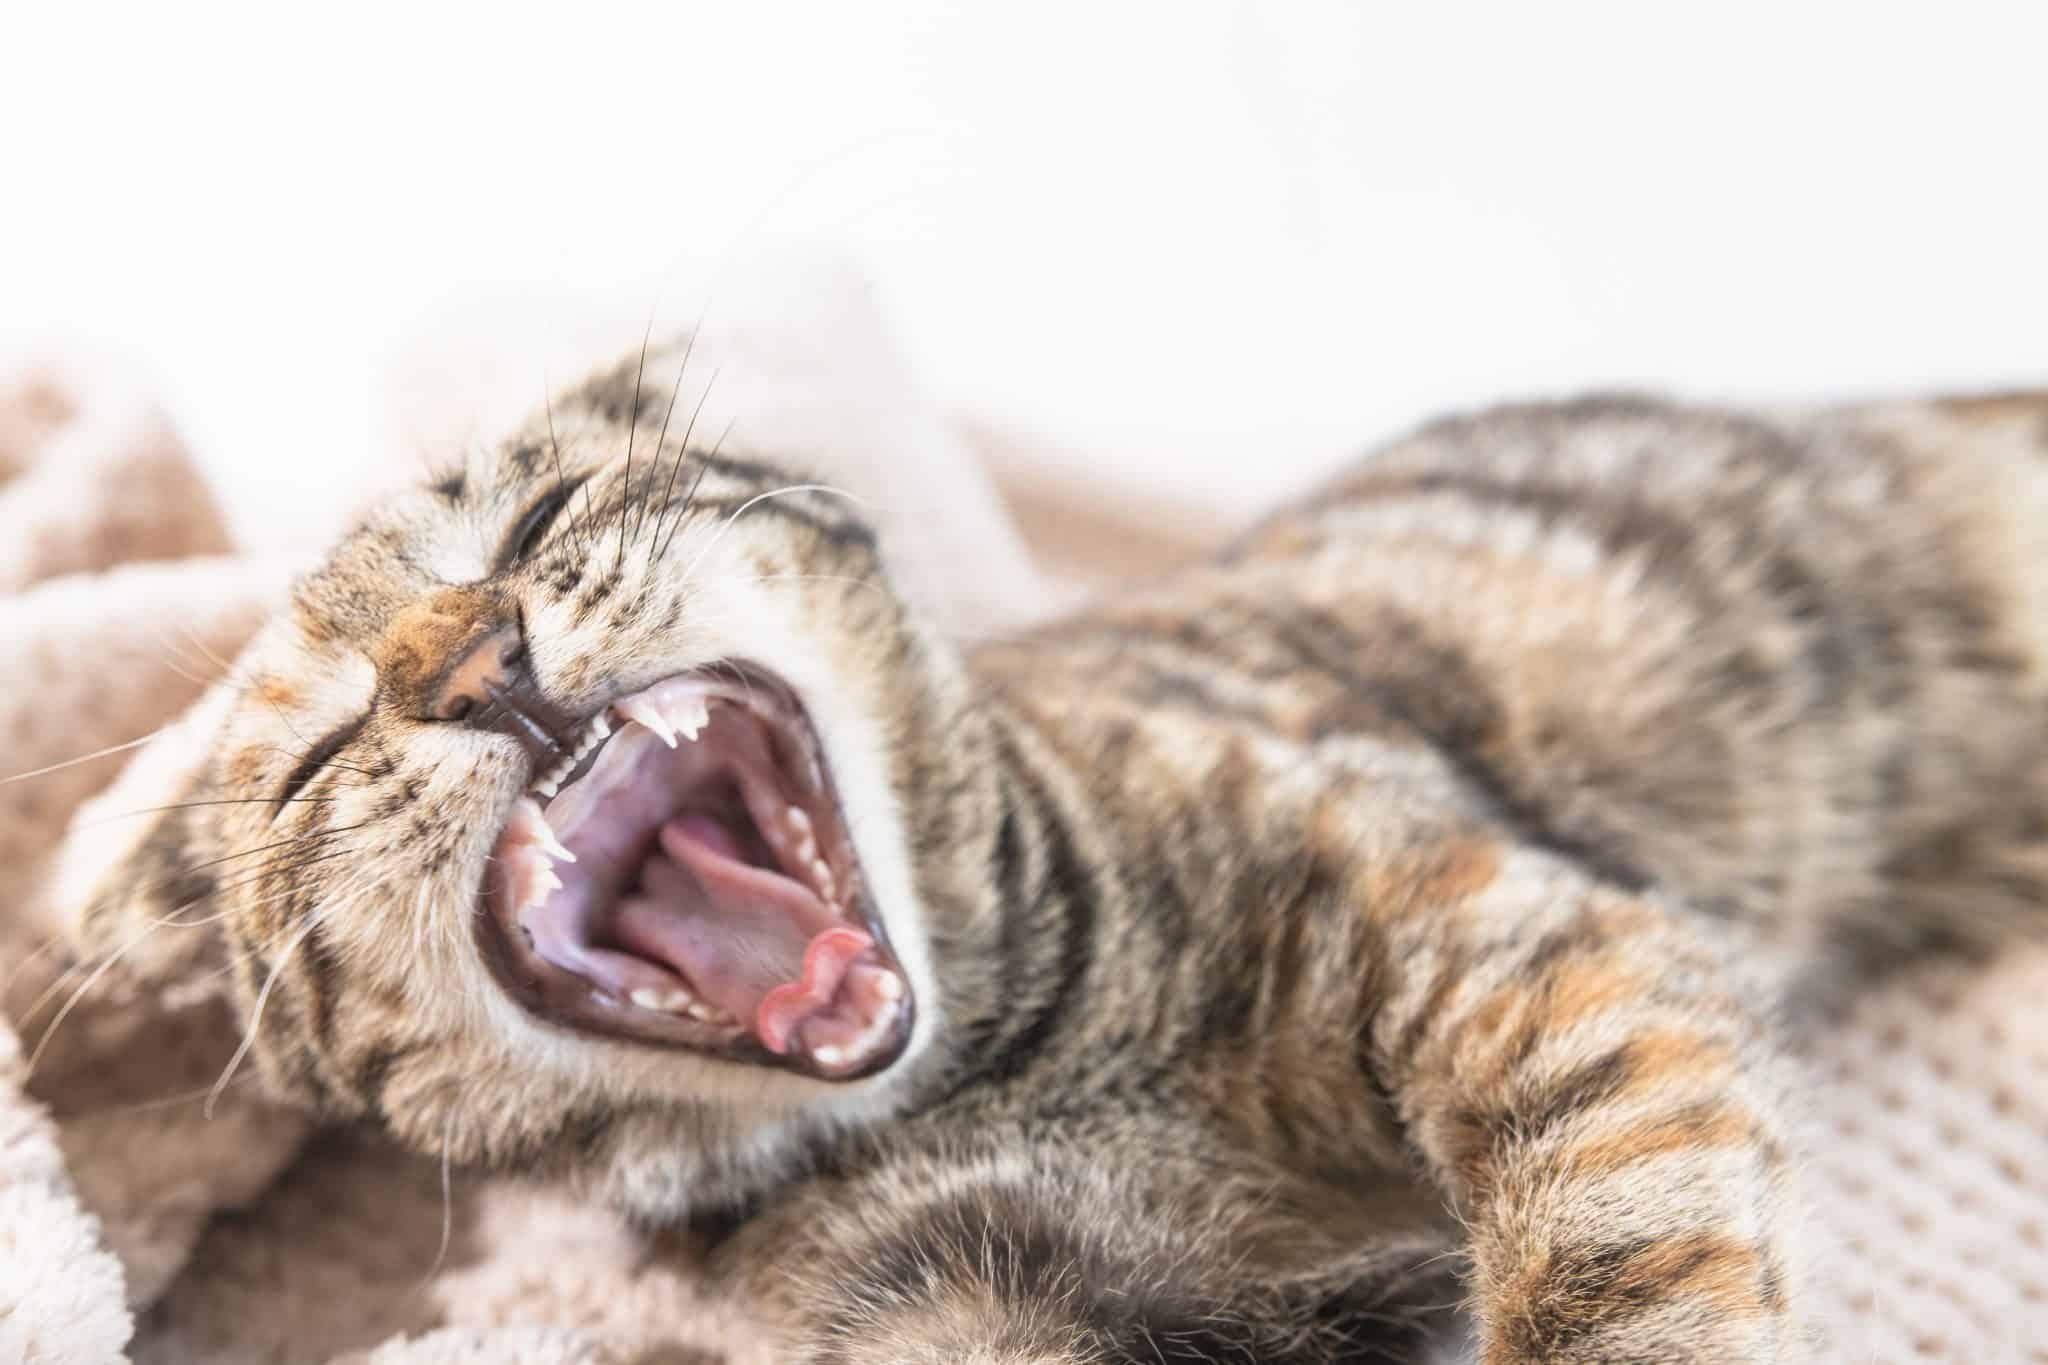 The Cat Yawns With Its Mouth Open While Lying On The Couch Indoors.